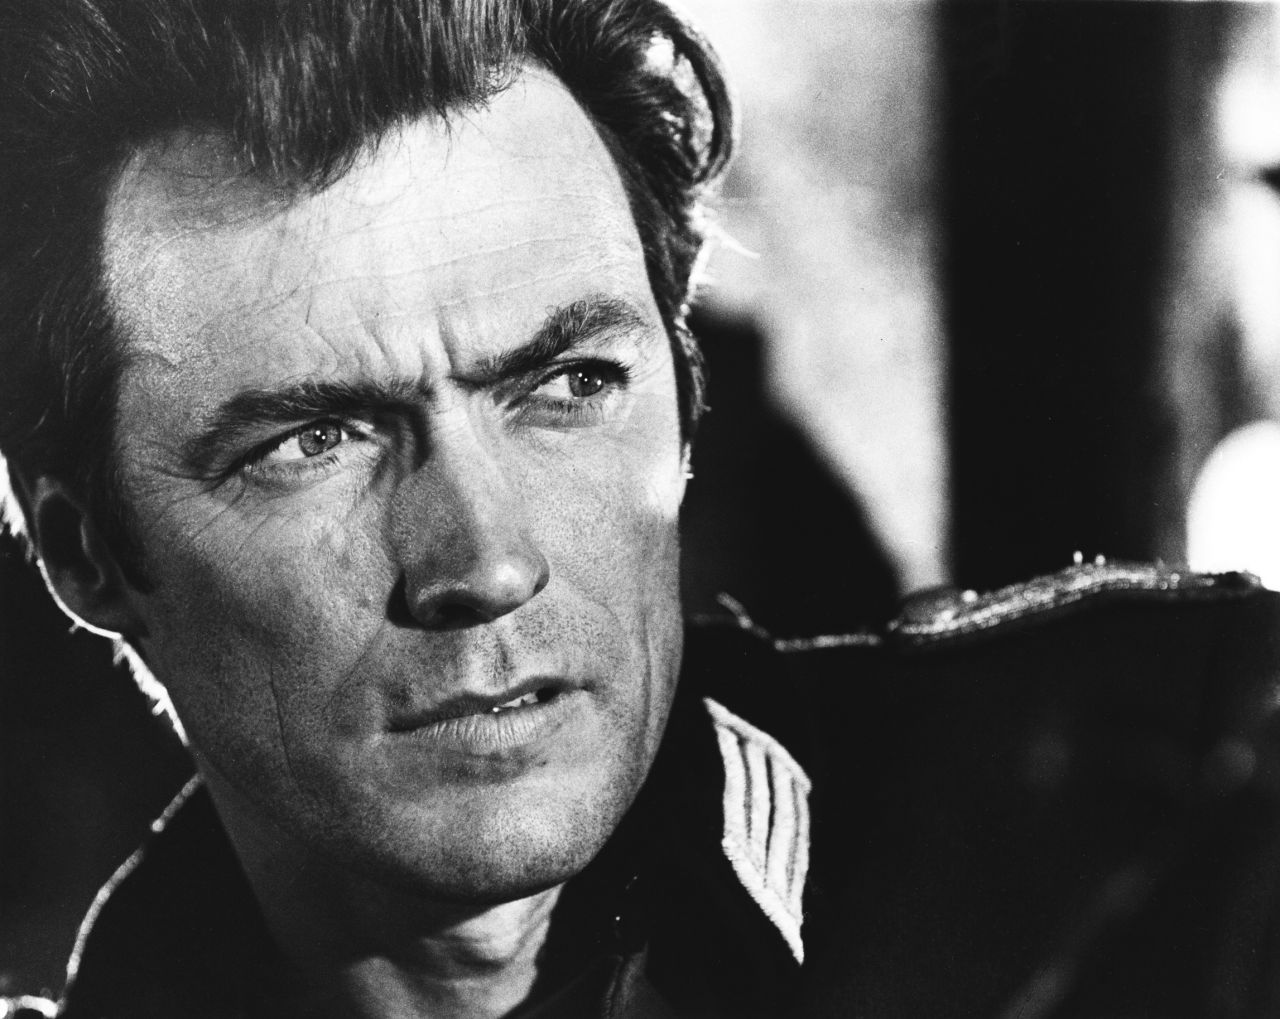 Eastwood in "Where Eagles Dare" (1968).